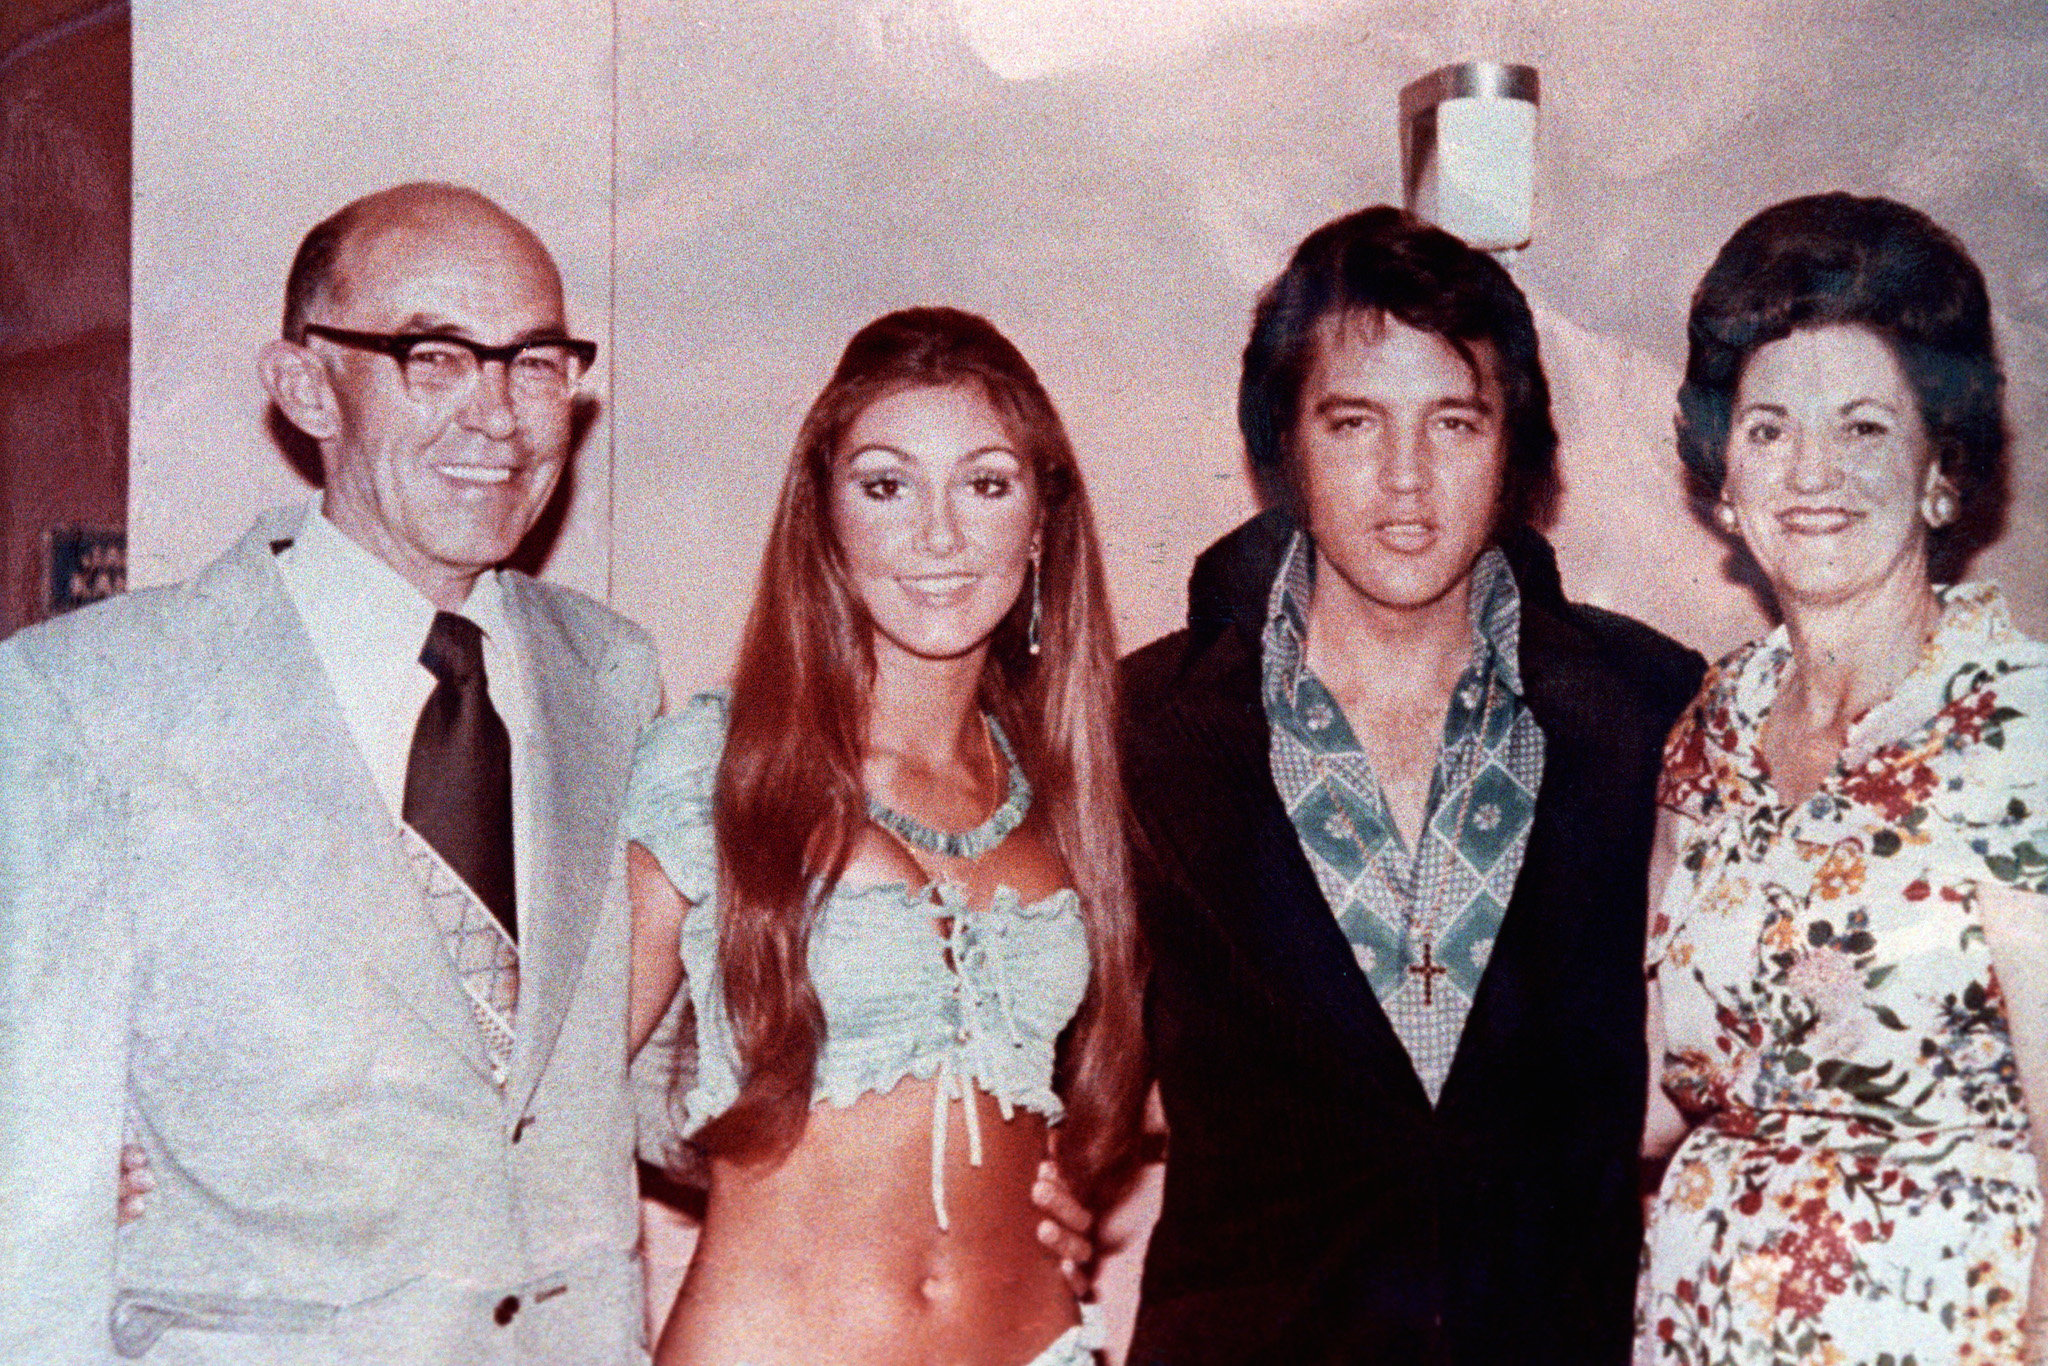 Elvis Presley with Linda Thompson and family